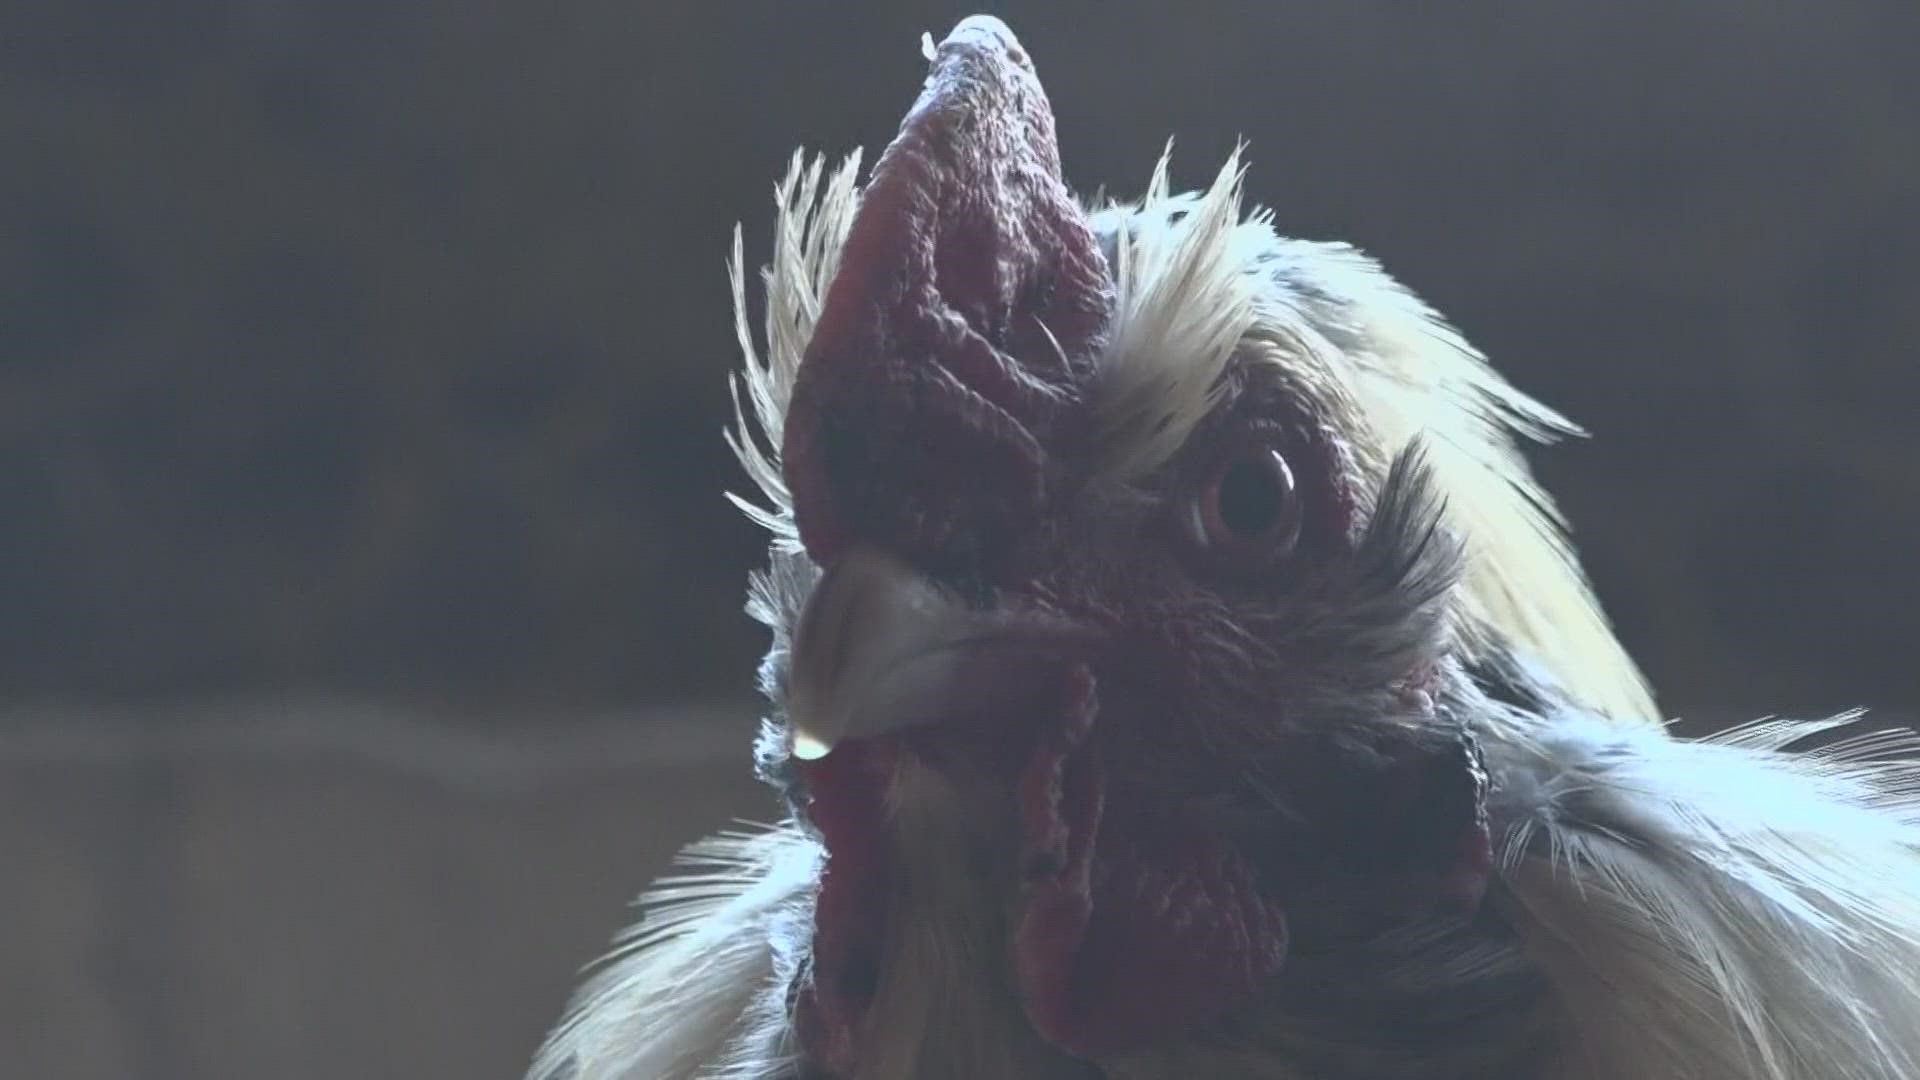 When Dave the Rooster flew the coop, everyone thought he was a goner. But this rogue rooster came home 10 months later.